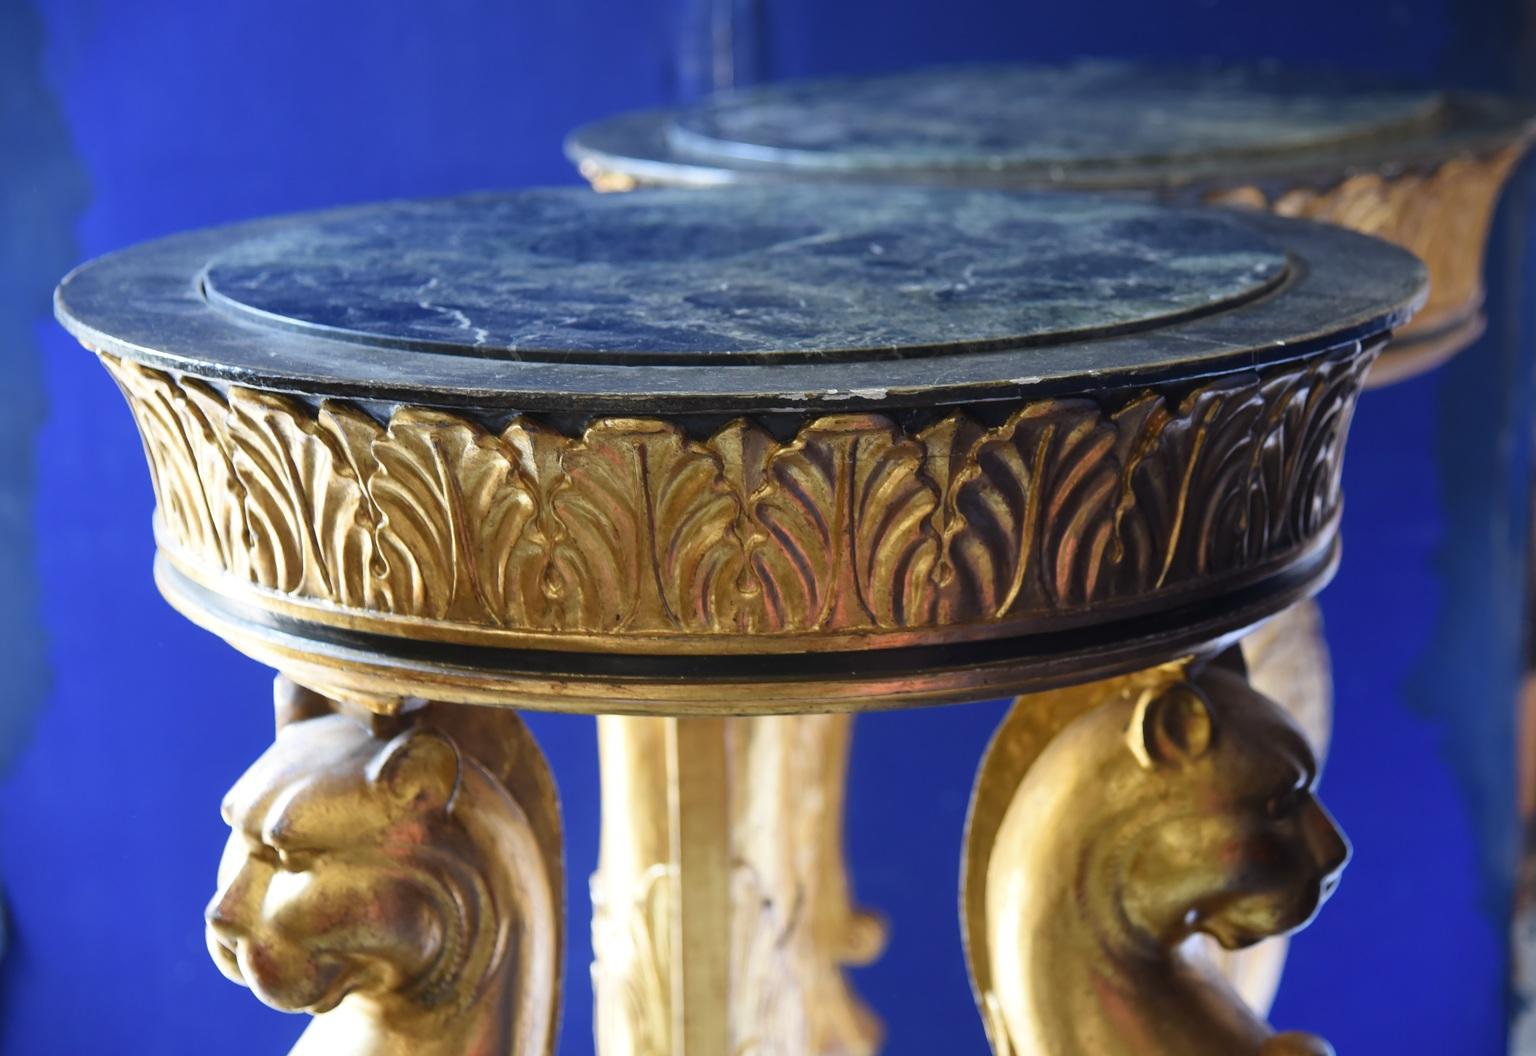 Elegant columns-pedestals in cherrywood carved and lacquered, the top in marble is a green Alps the Gilding is in Gold leaf. Refined Decorative objects that adapt to different uses: Support for Planters, supports for busts, supports for Vases. The